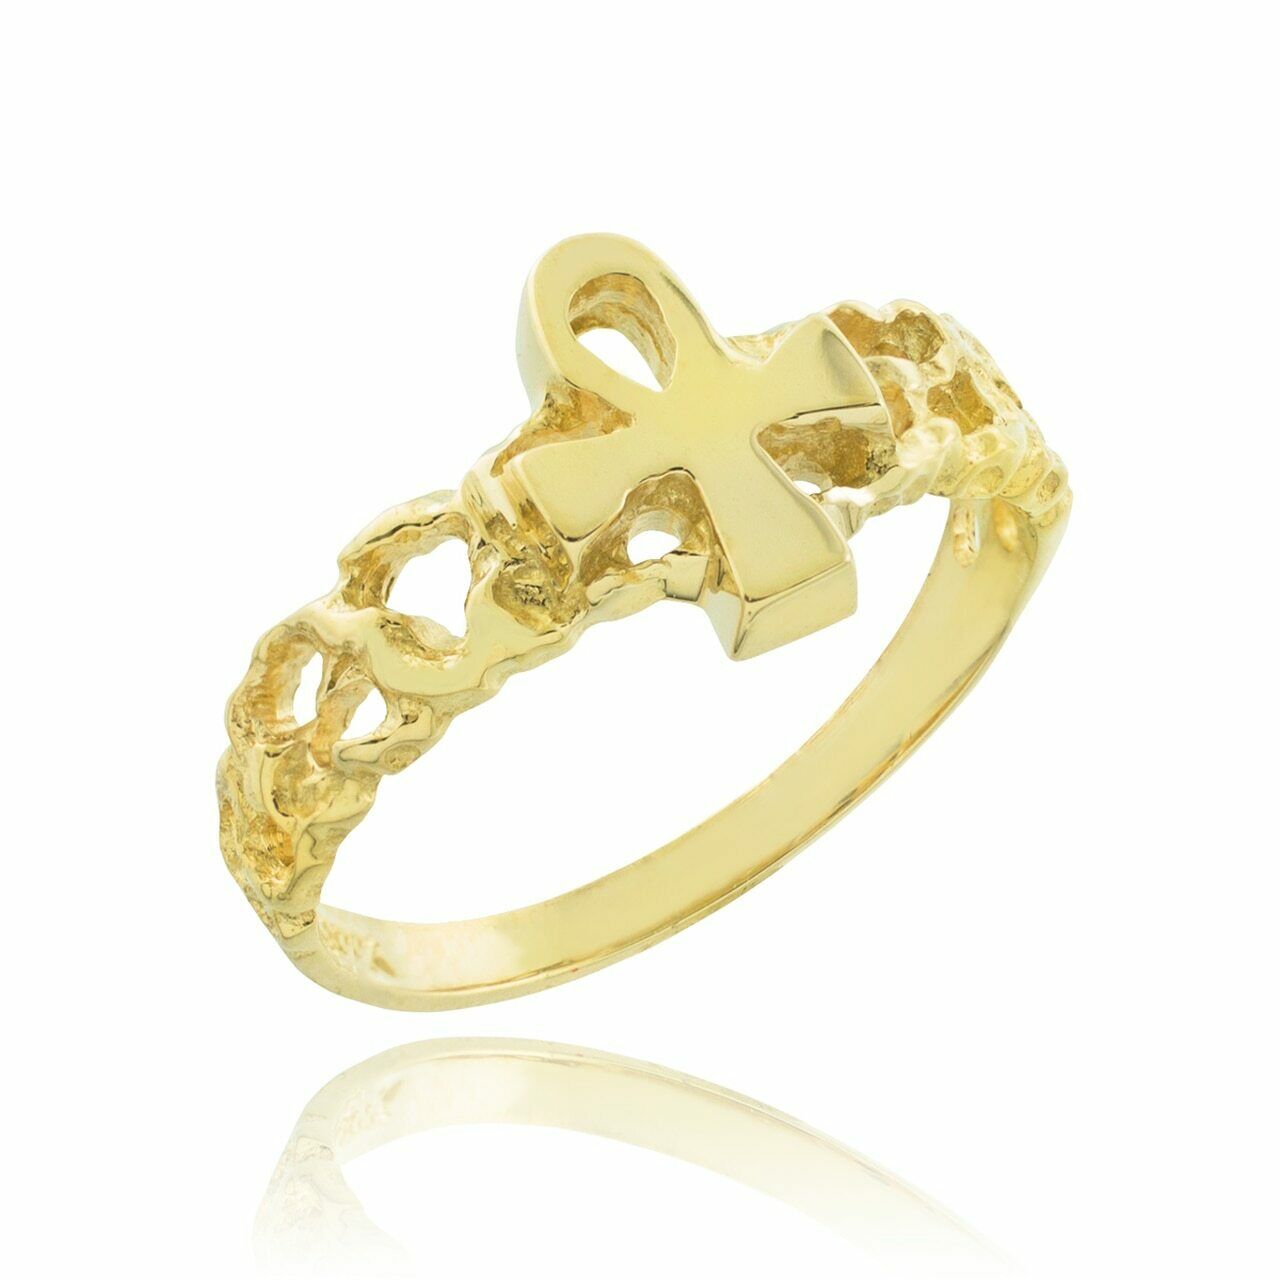 14k Yellow Gold Ankh Cross Nugget Knuckle Ring Size 1, 2, 3, 4, 5, 6, 7, 8